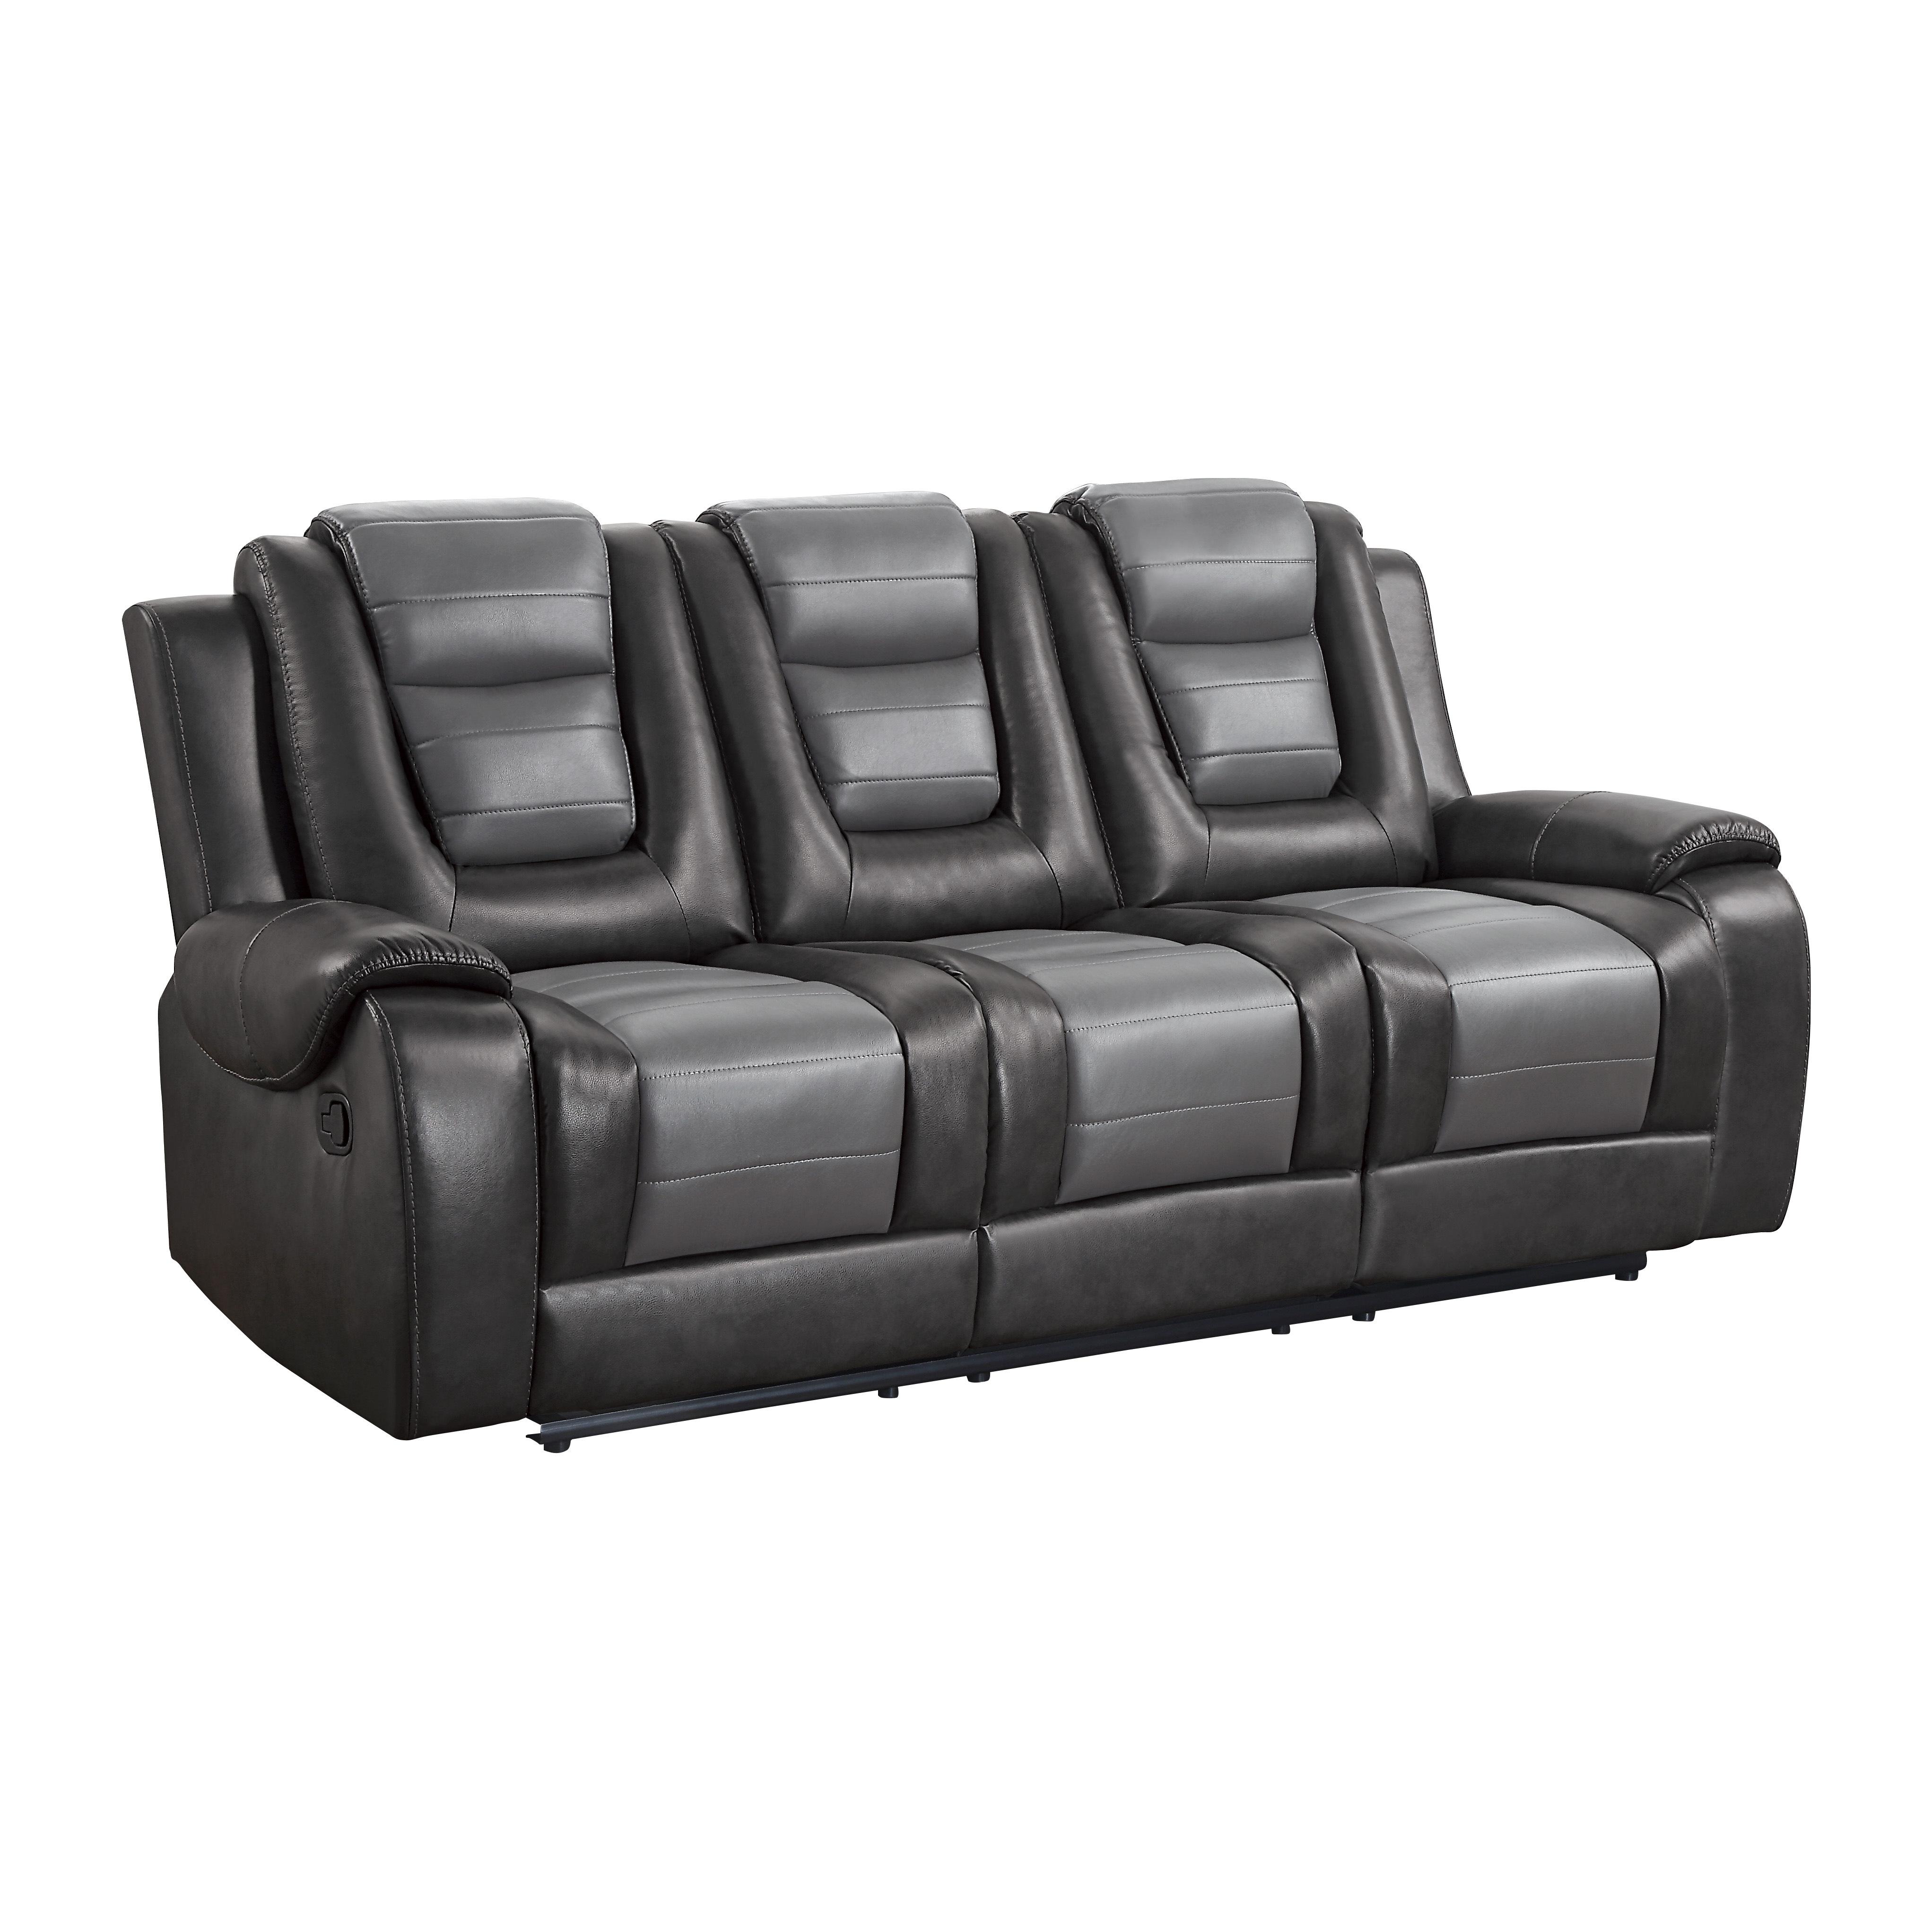 

    
Transitional Dark Gray & Light Gray Faux Leather Reclining Sofa Homelegance 9470GY-3 Briscoe
